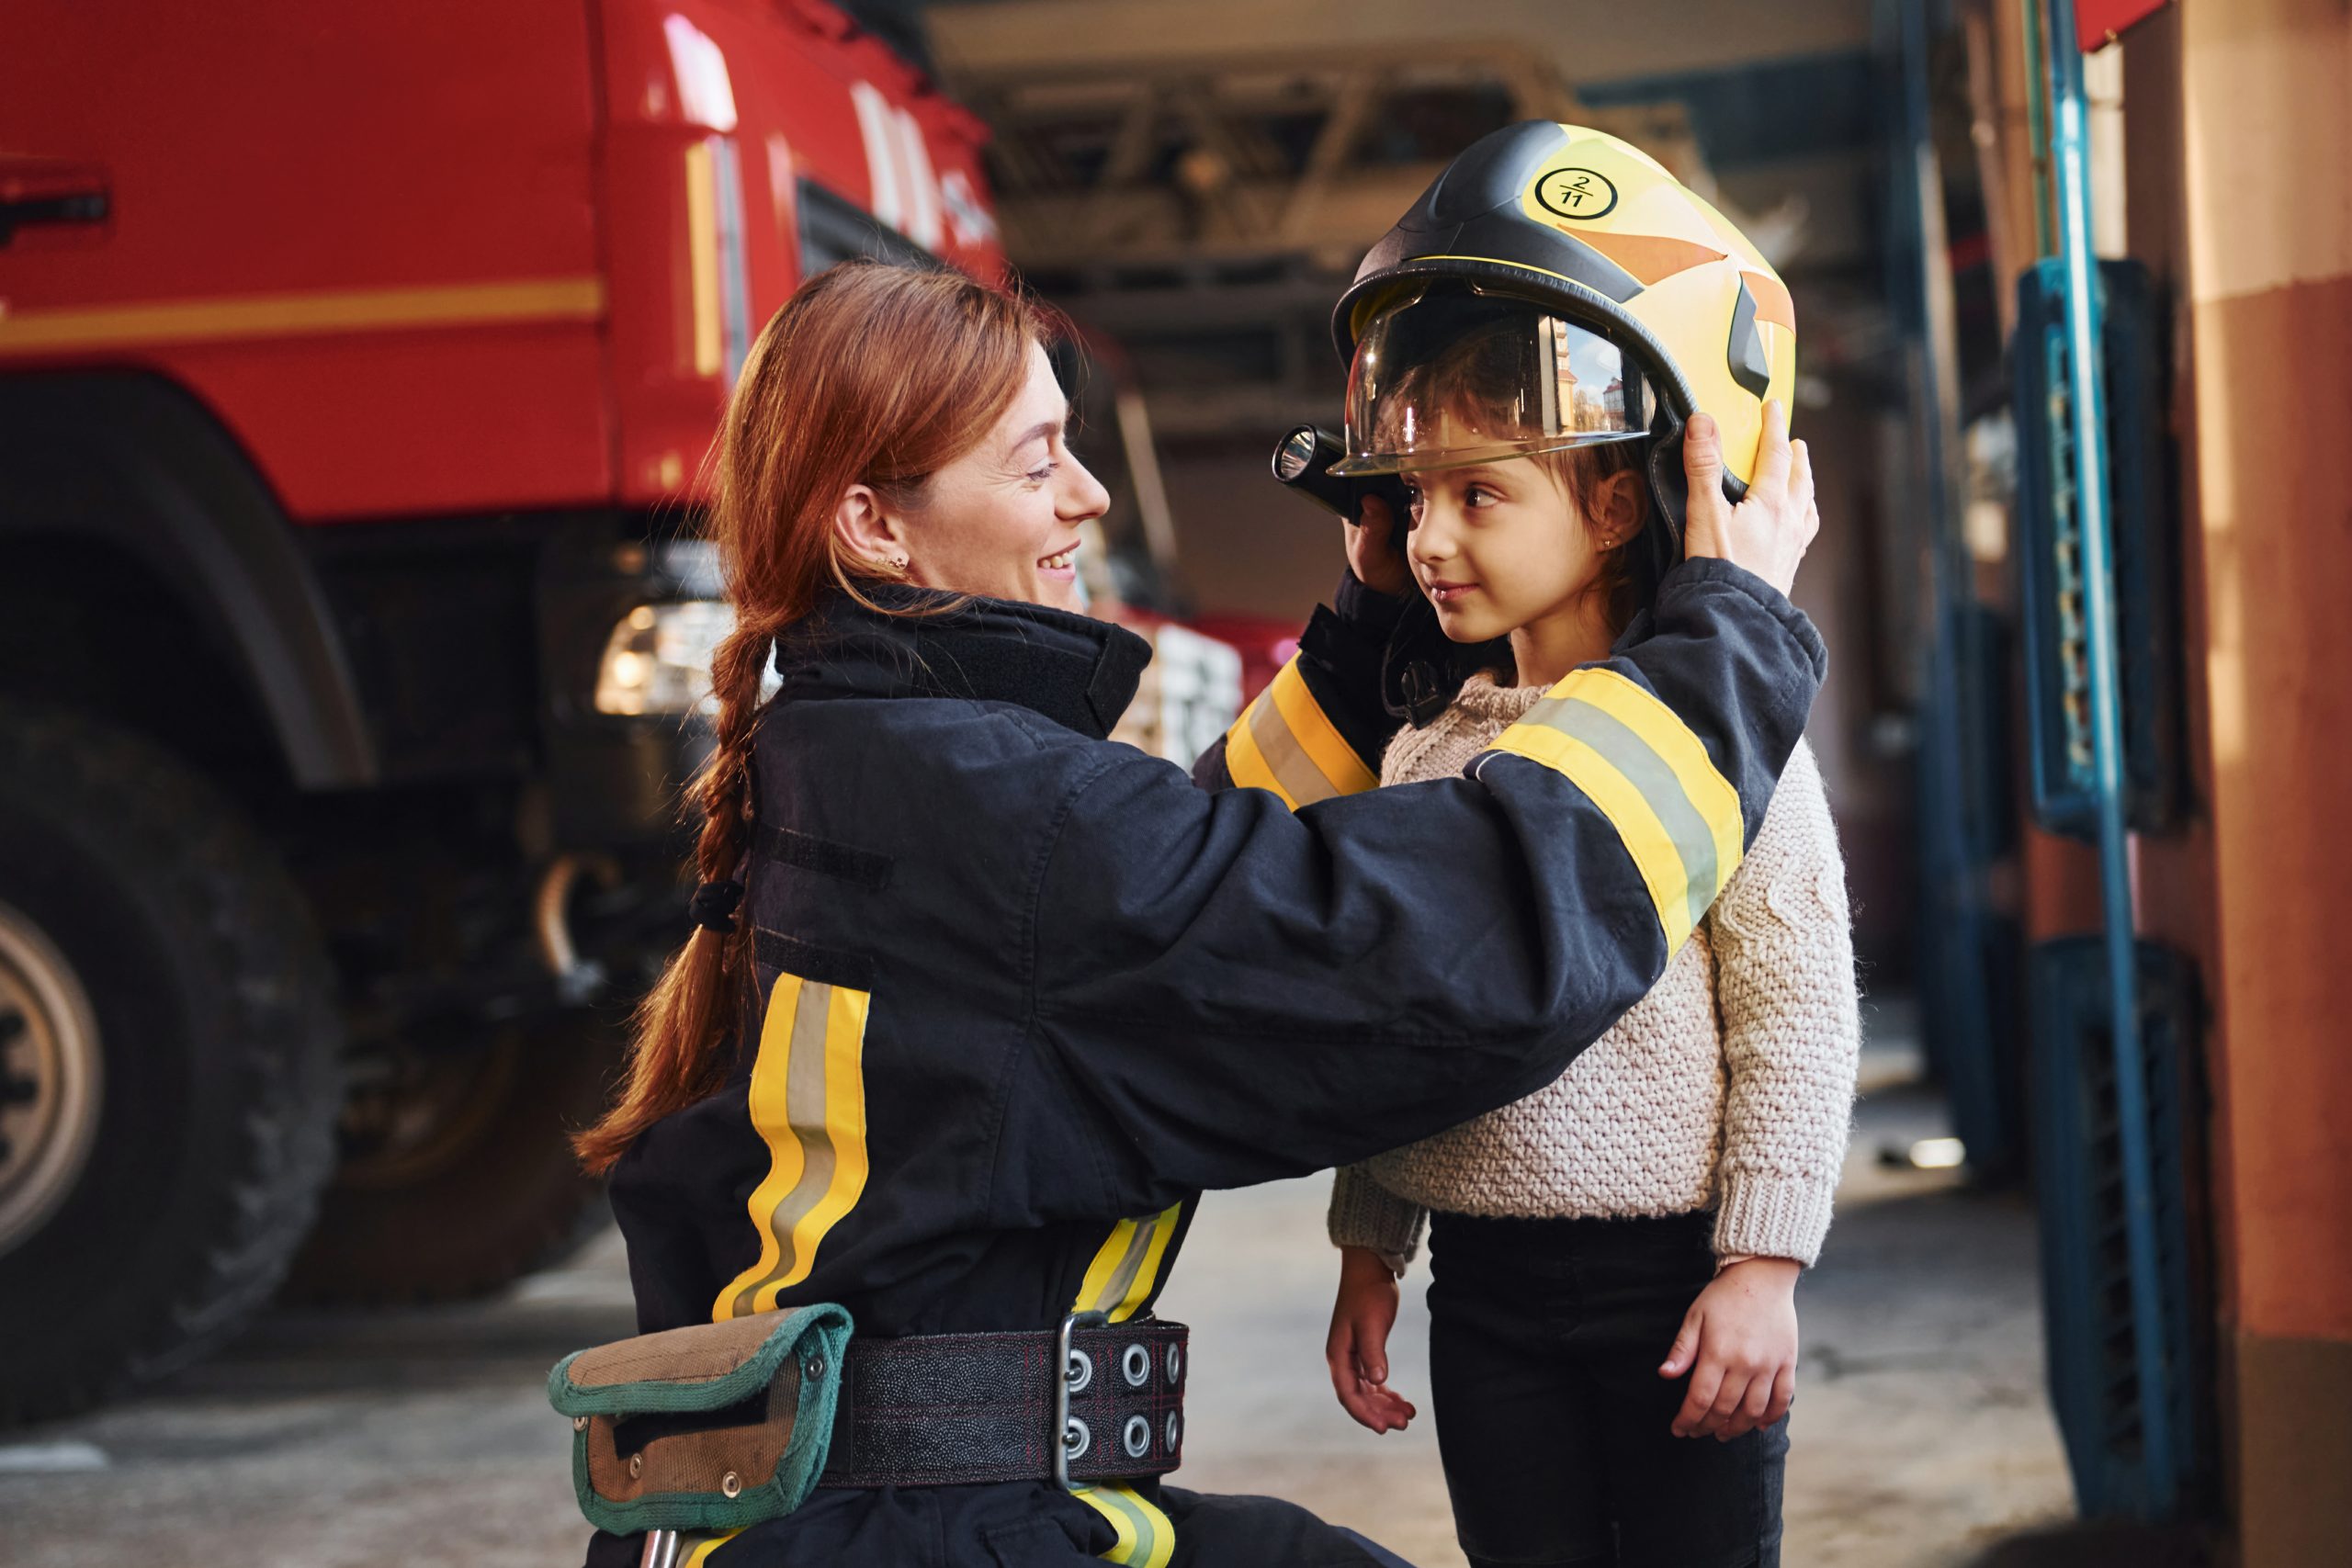 An image of a firefighter for our FAQ on Do You Need a Degree to Be a Firefighter?